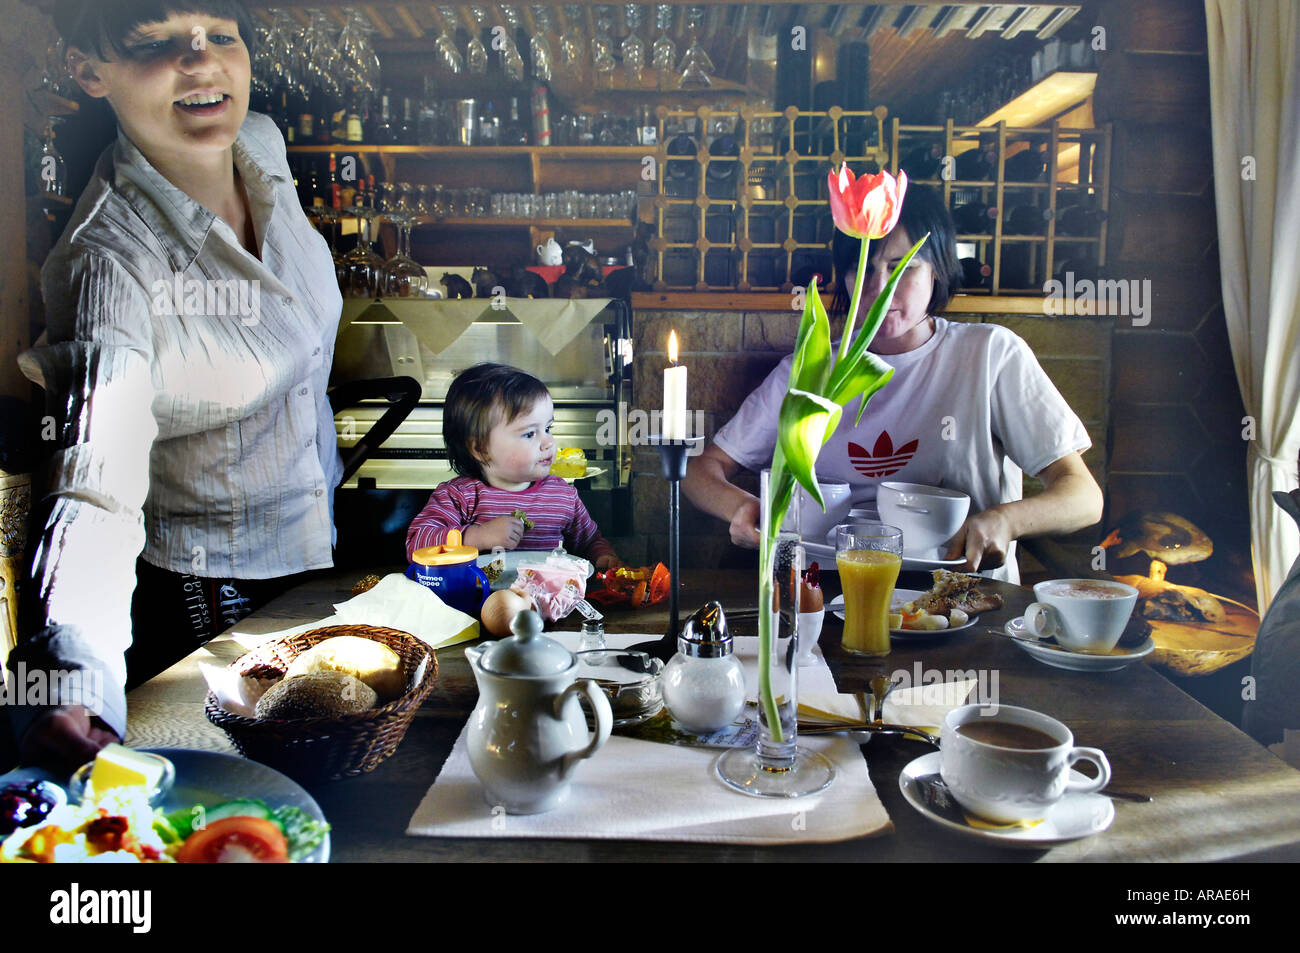 mother daughter waitress surreal cafe culture vivid dreamlike breakfast service germany idyllic happy positive morning Stock Photo